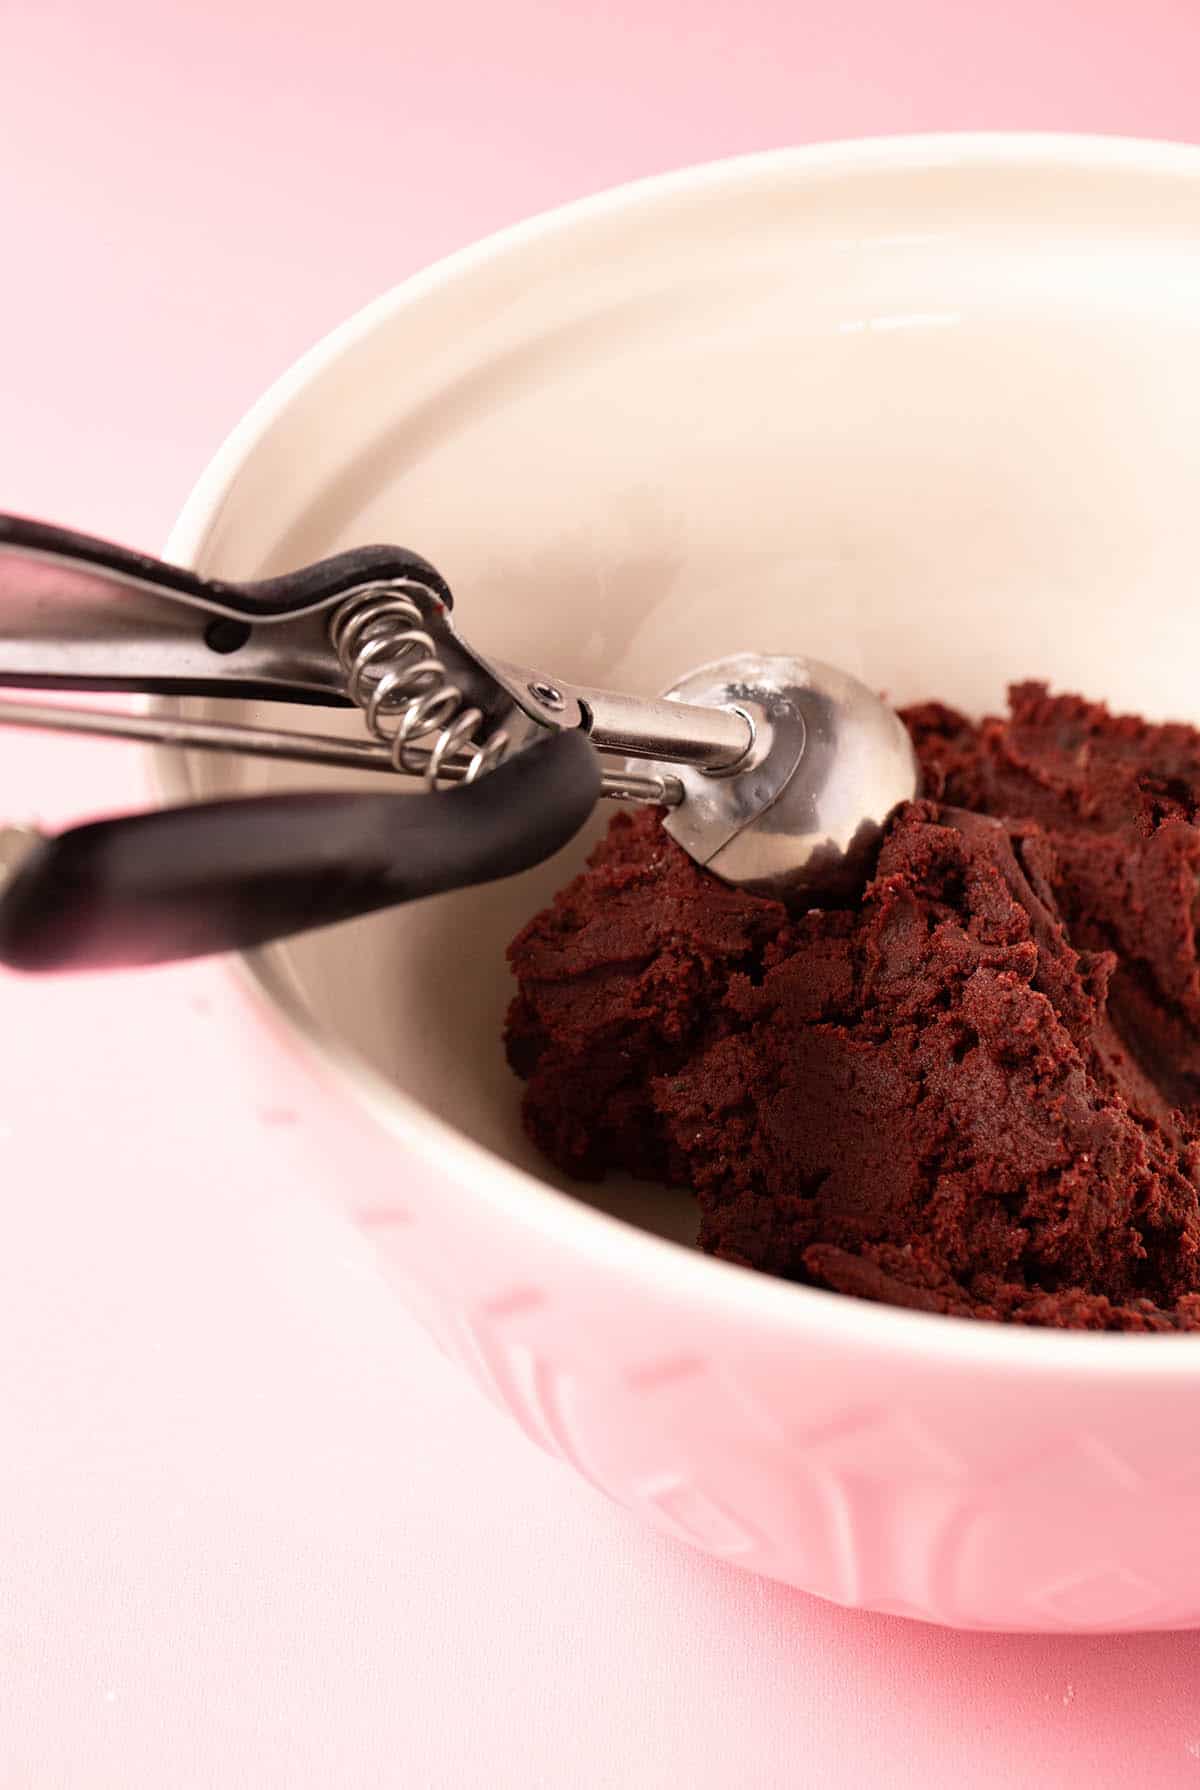 Red velvet cookie dough in a pink bowl with a standard cookie scoop.